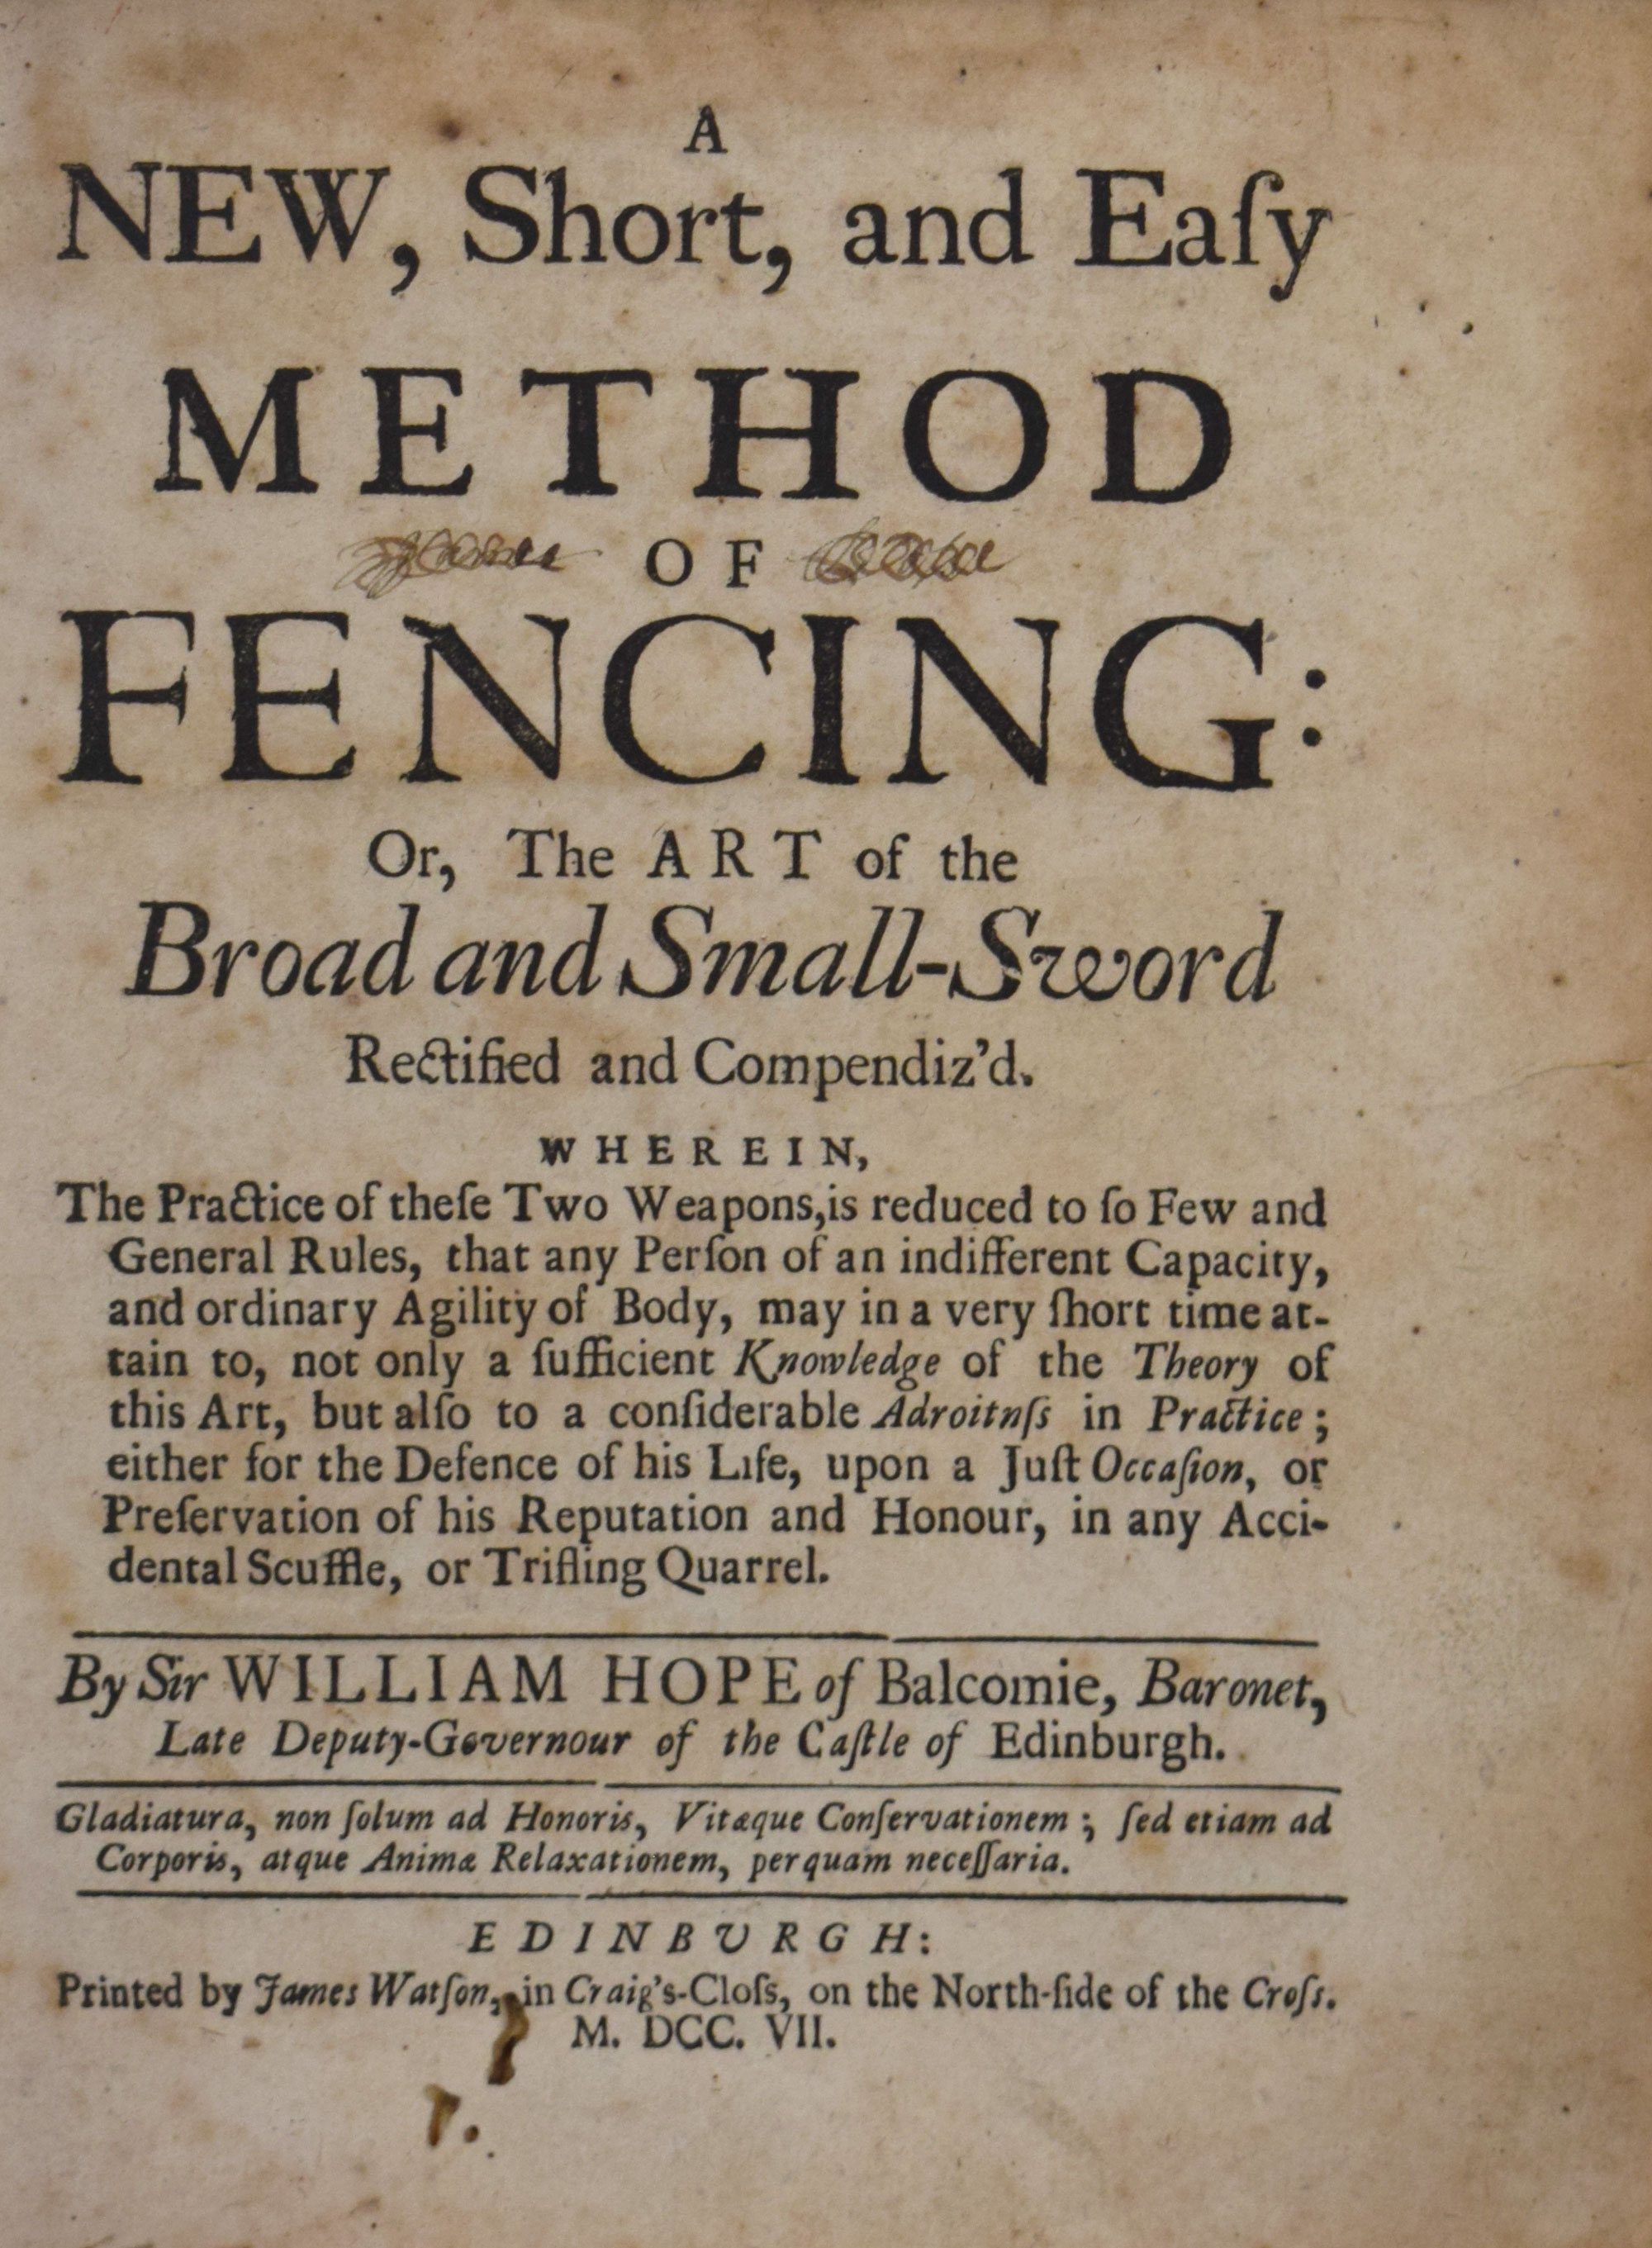 A New, Short, and Easy Method of Fencing: Or, The Art of the Broad and Small-Sword.